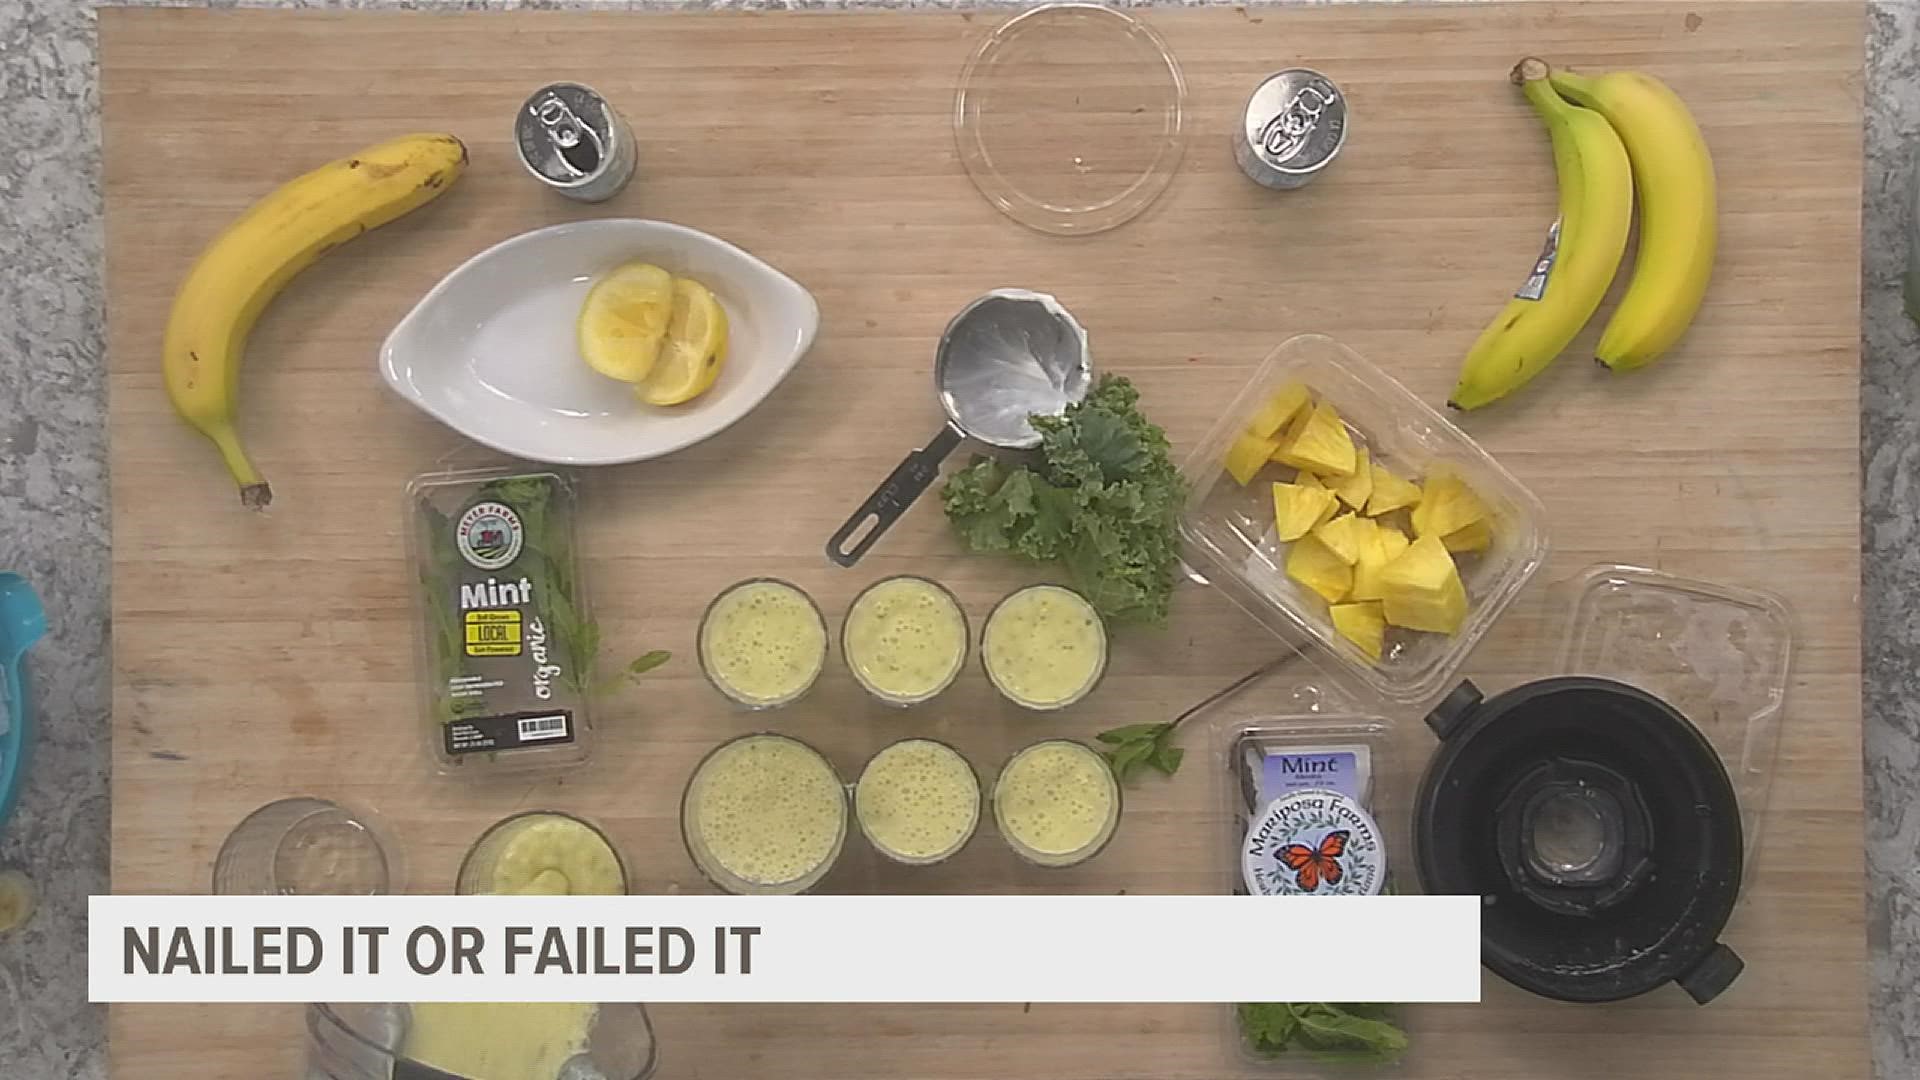 News 8's Linda Swinford and David Bohlman have a smoothie faceoff for Nailed It or Failed It. Which is better, the pineapple or kale smoothie?